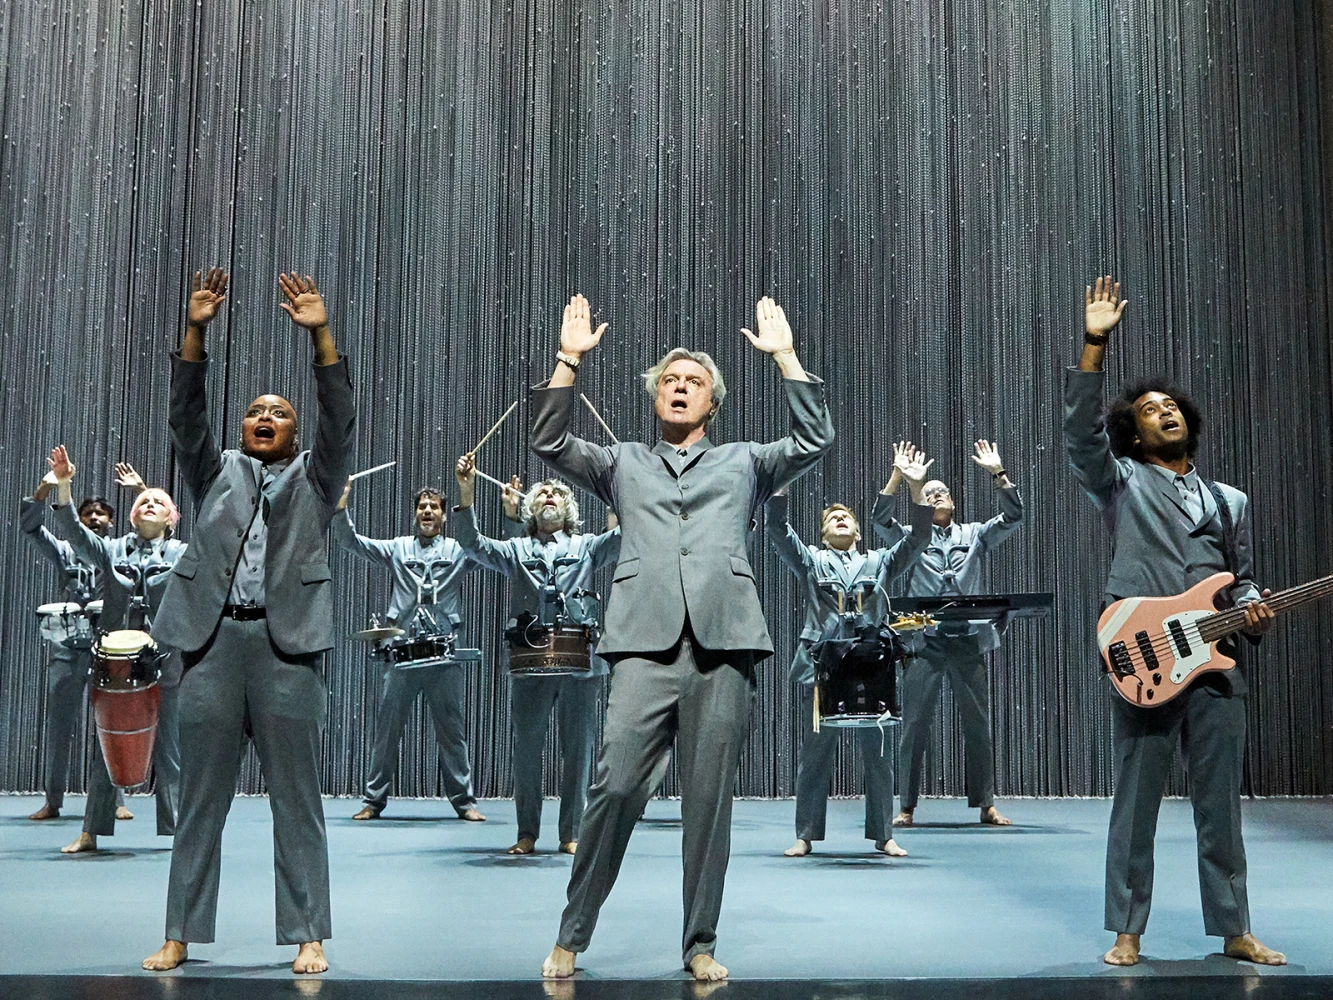 David Byrne's American Utopia: What to expect - 4